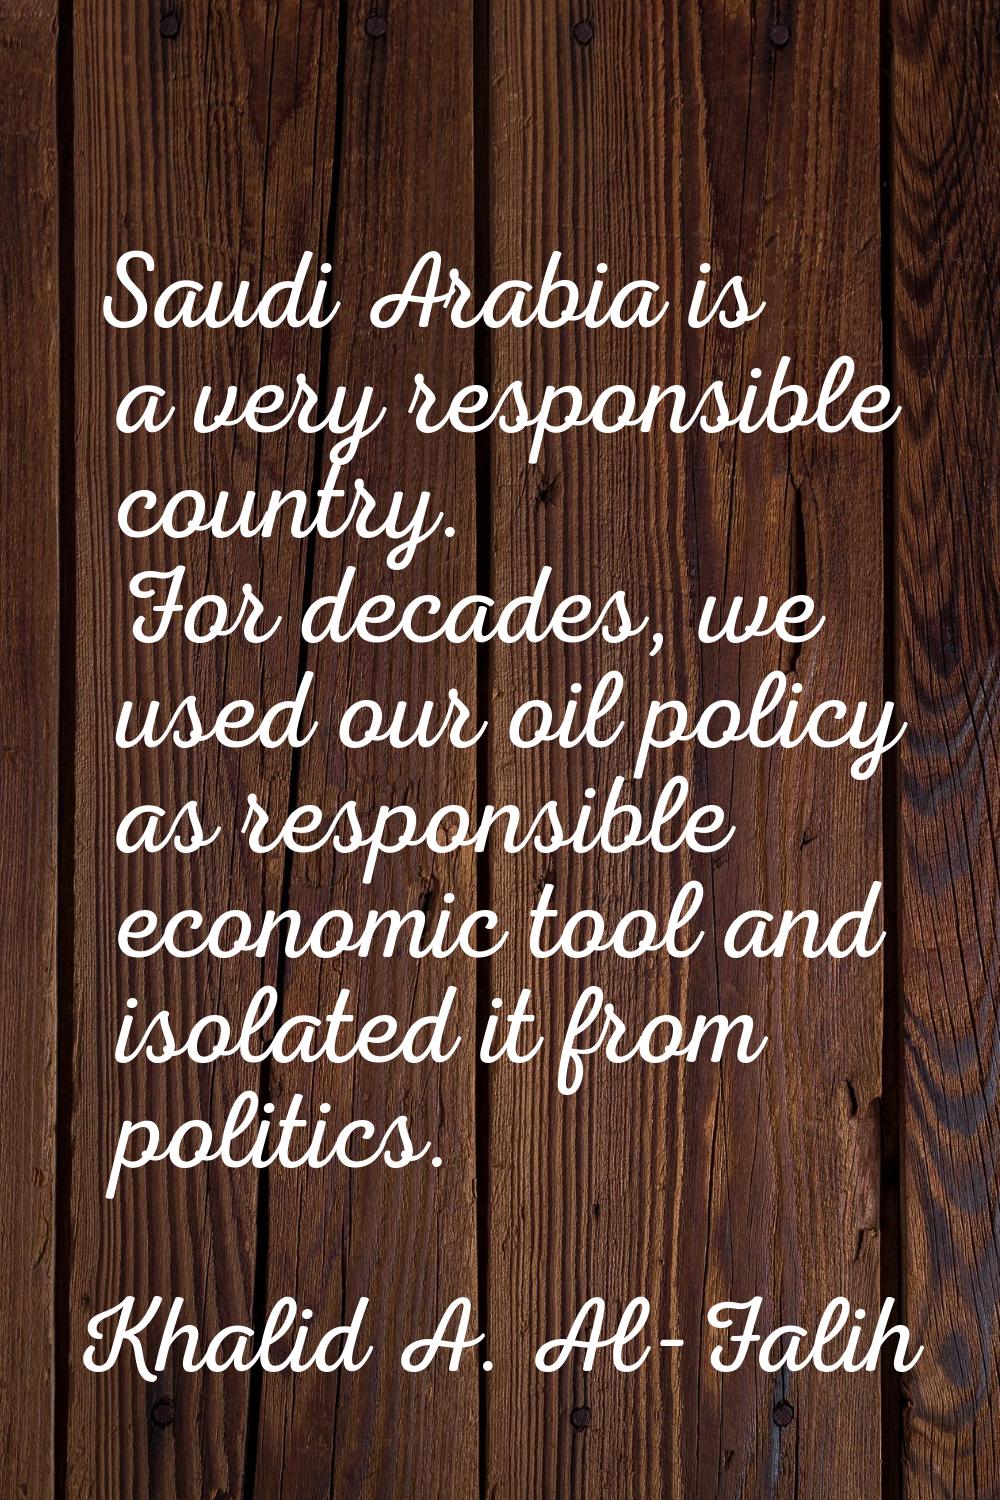 Saudi Arabia is a very responsible country. For decades, we used our oil policy as responsible econ